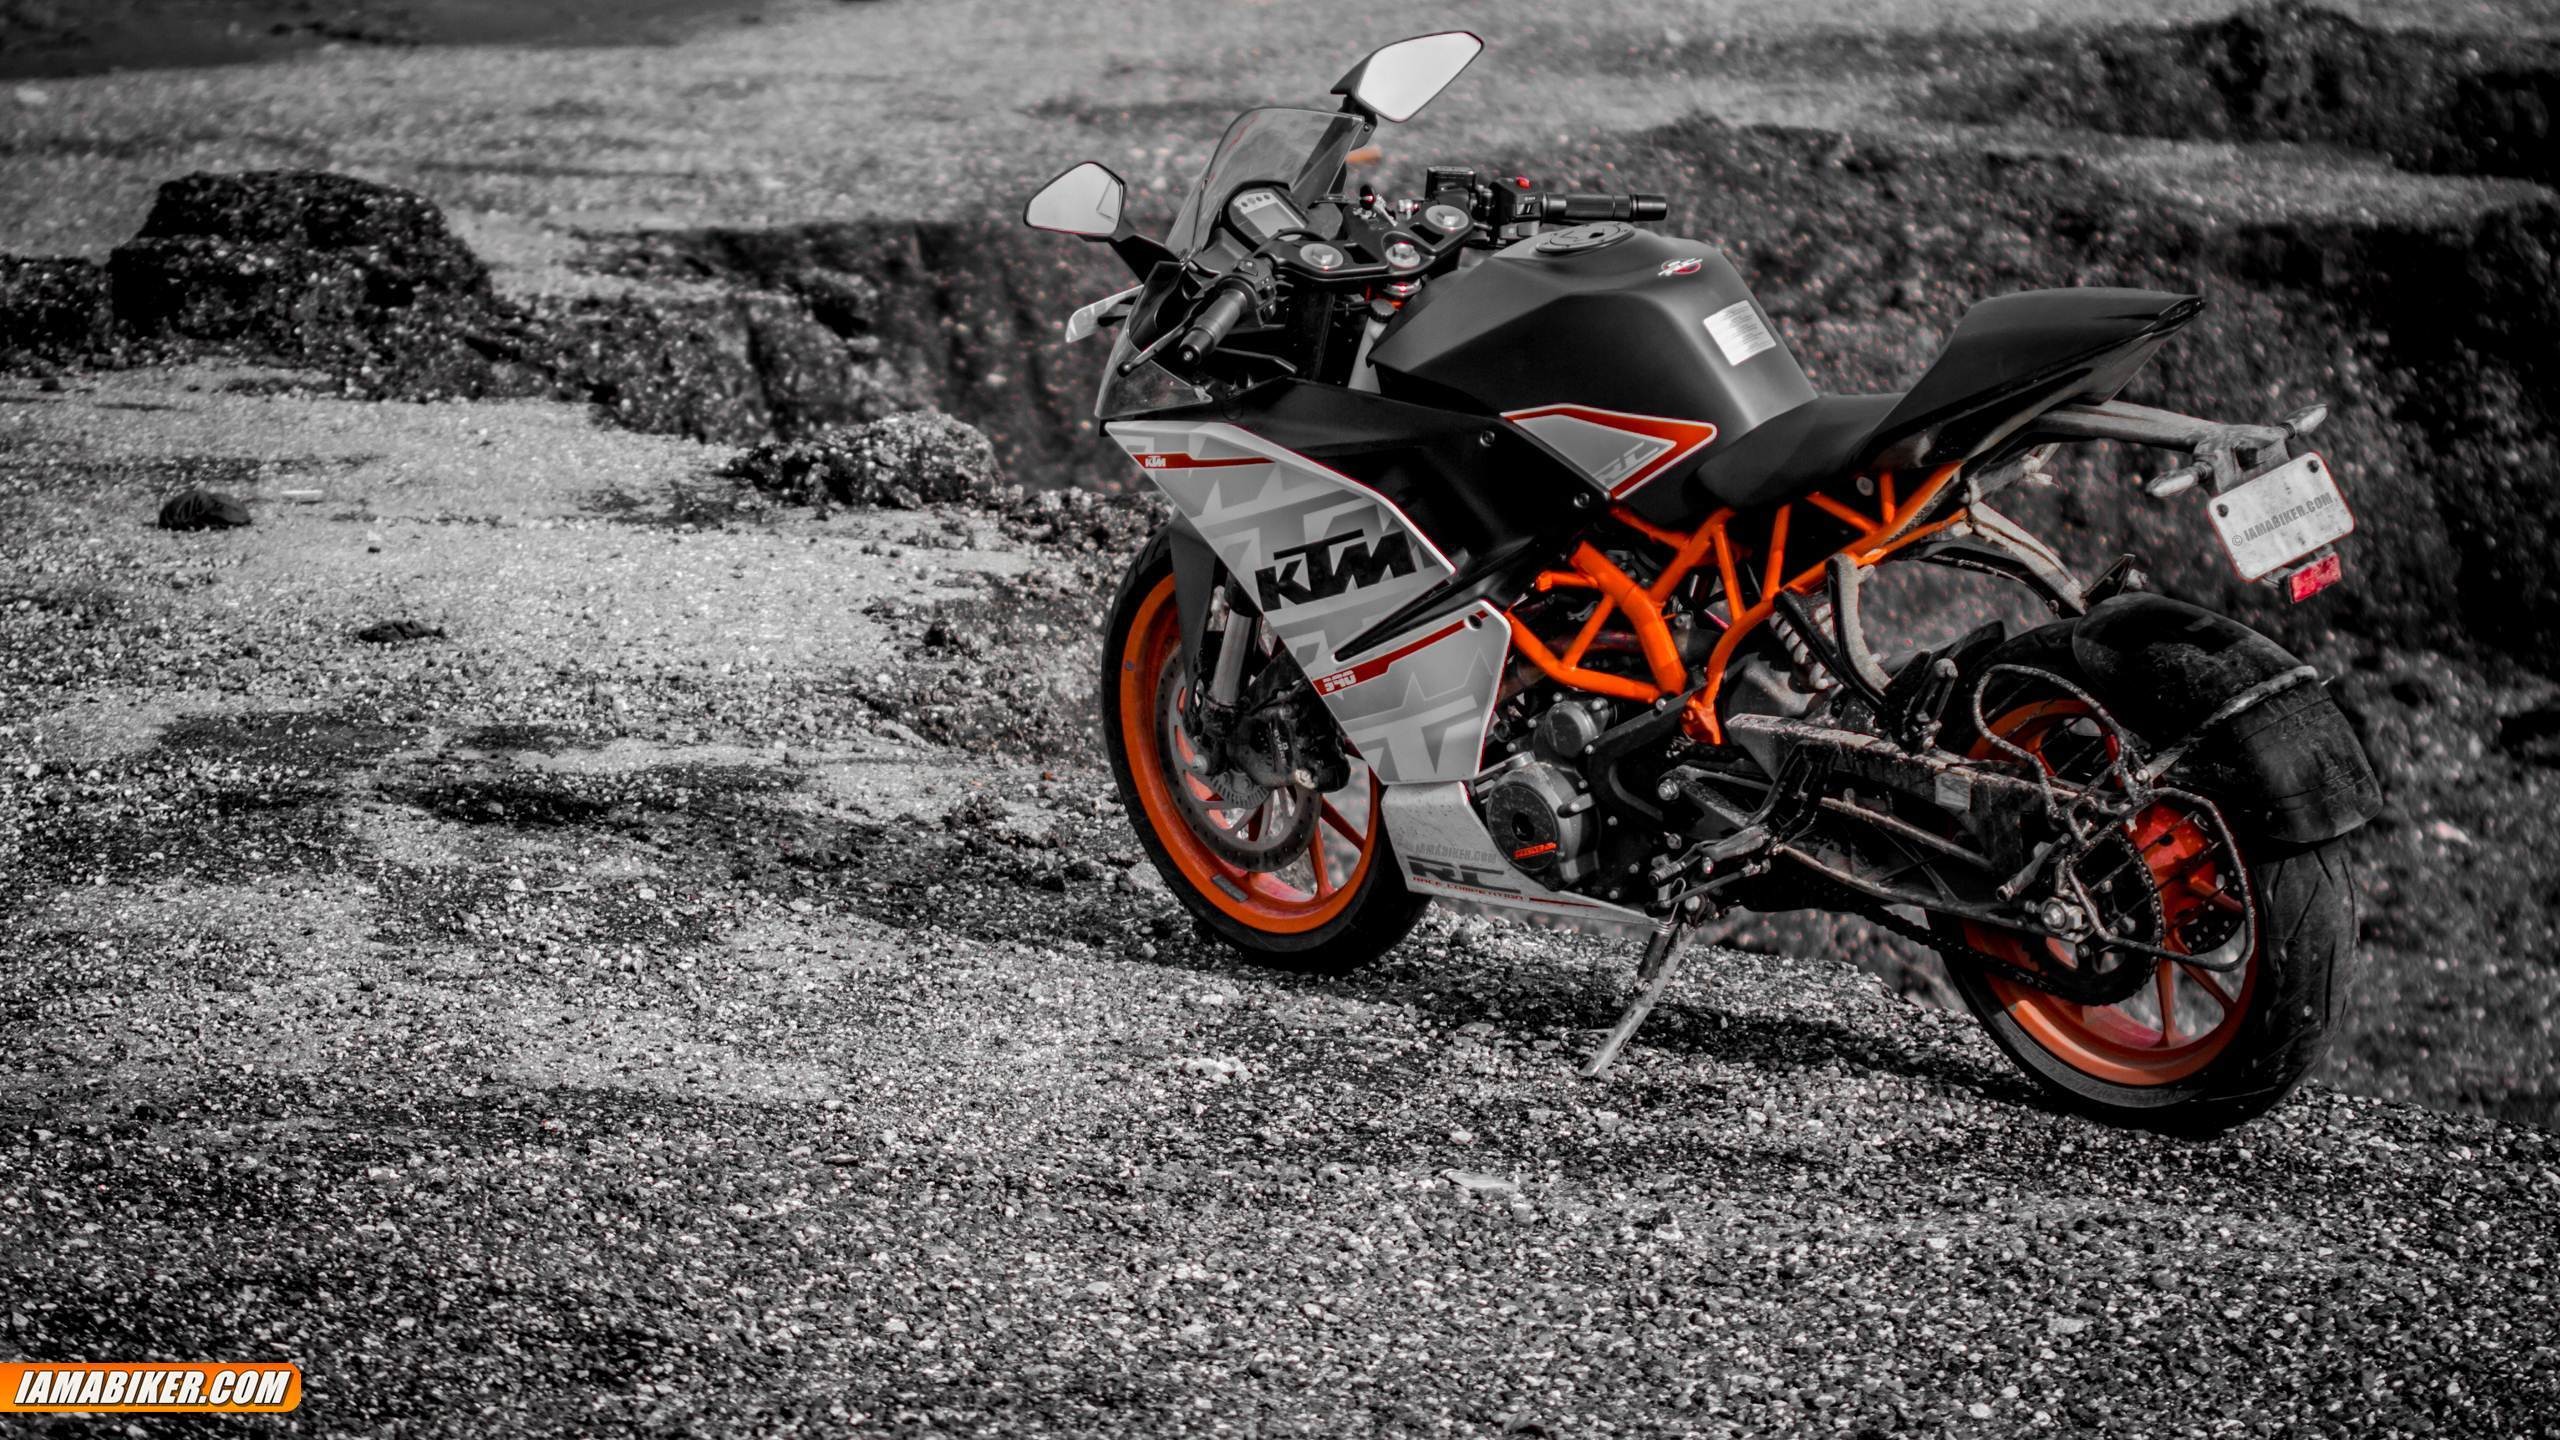 2560x1440 KTM RC 390 wallpapers - 5